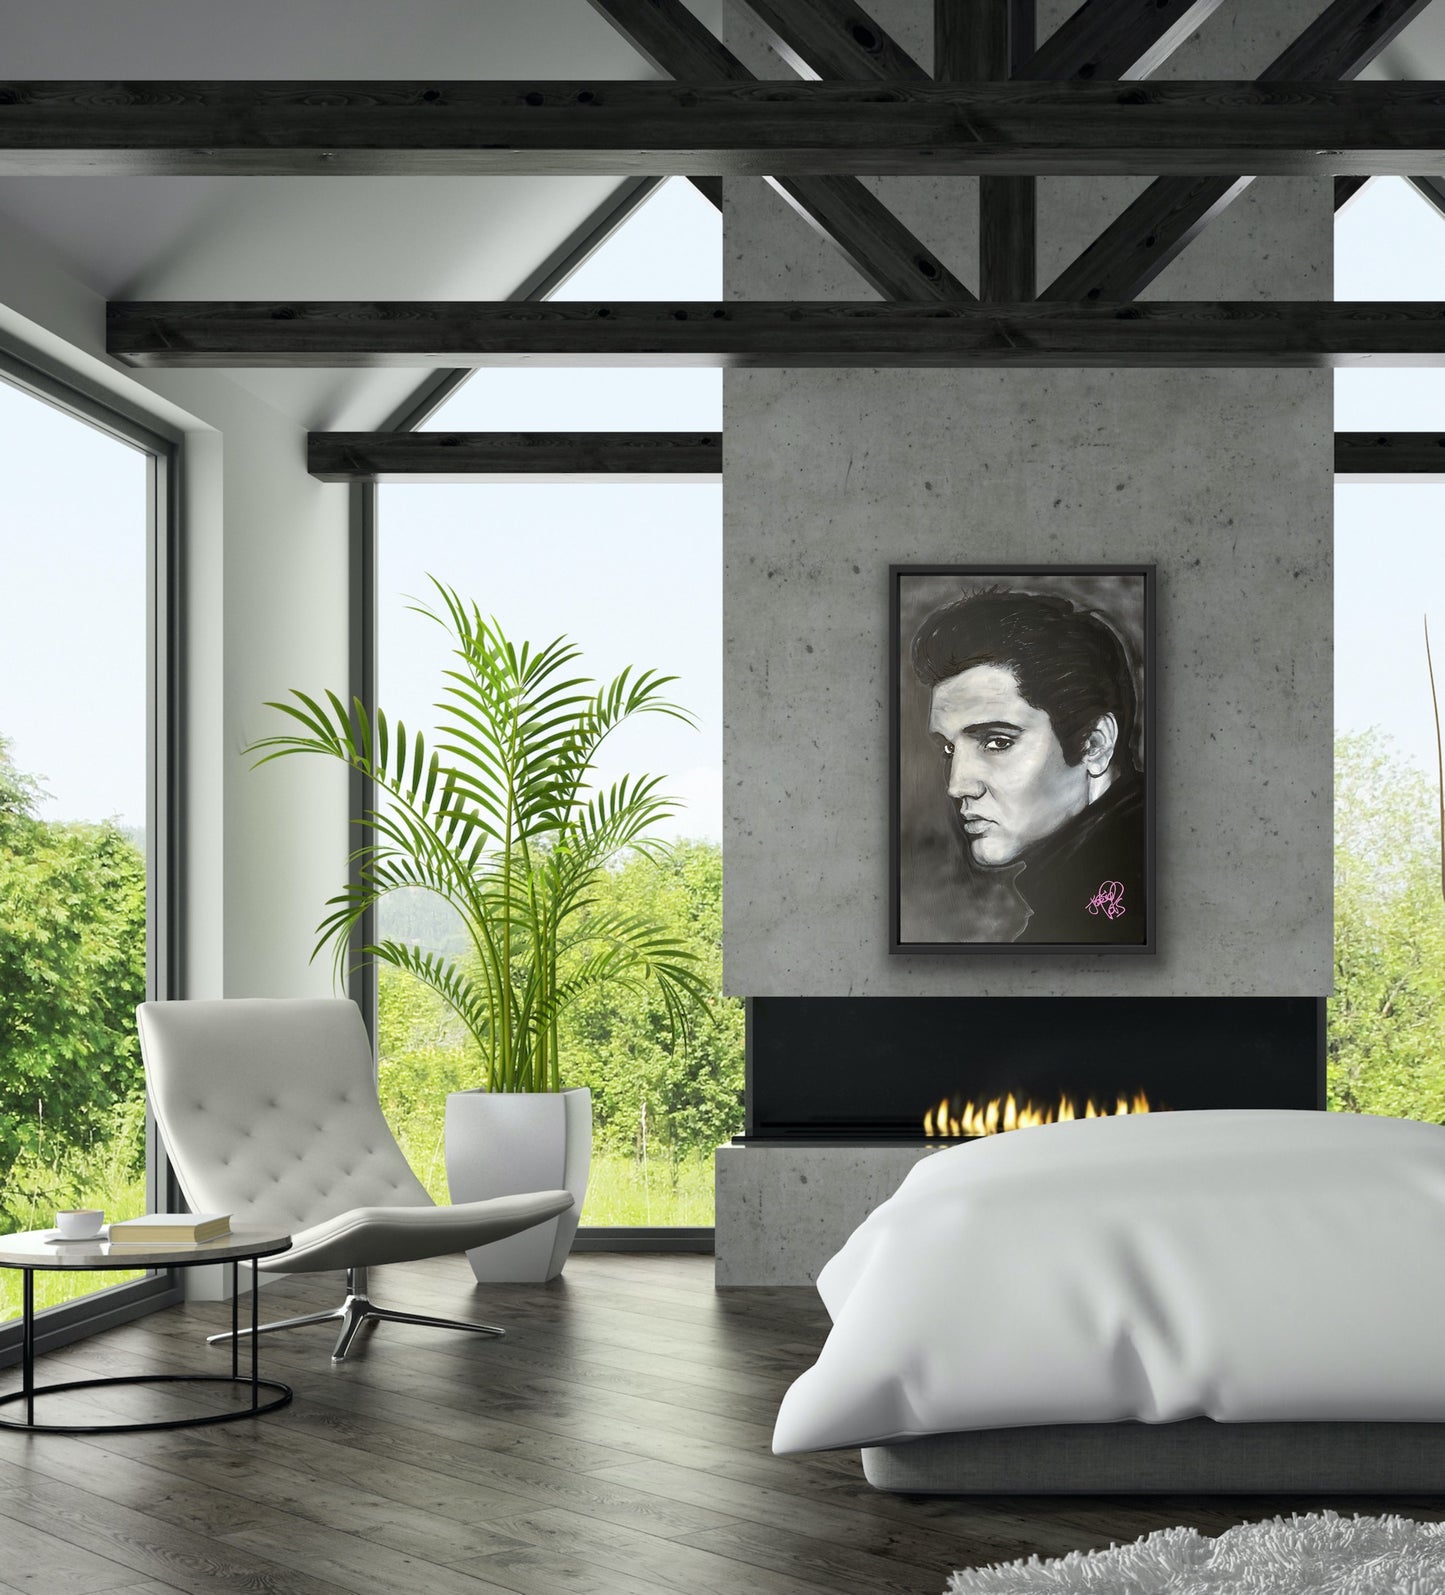 ‘THE KING’ Elvis Presley Limited Edition Print